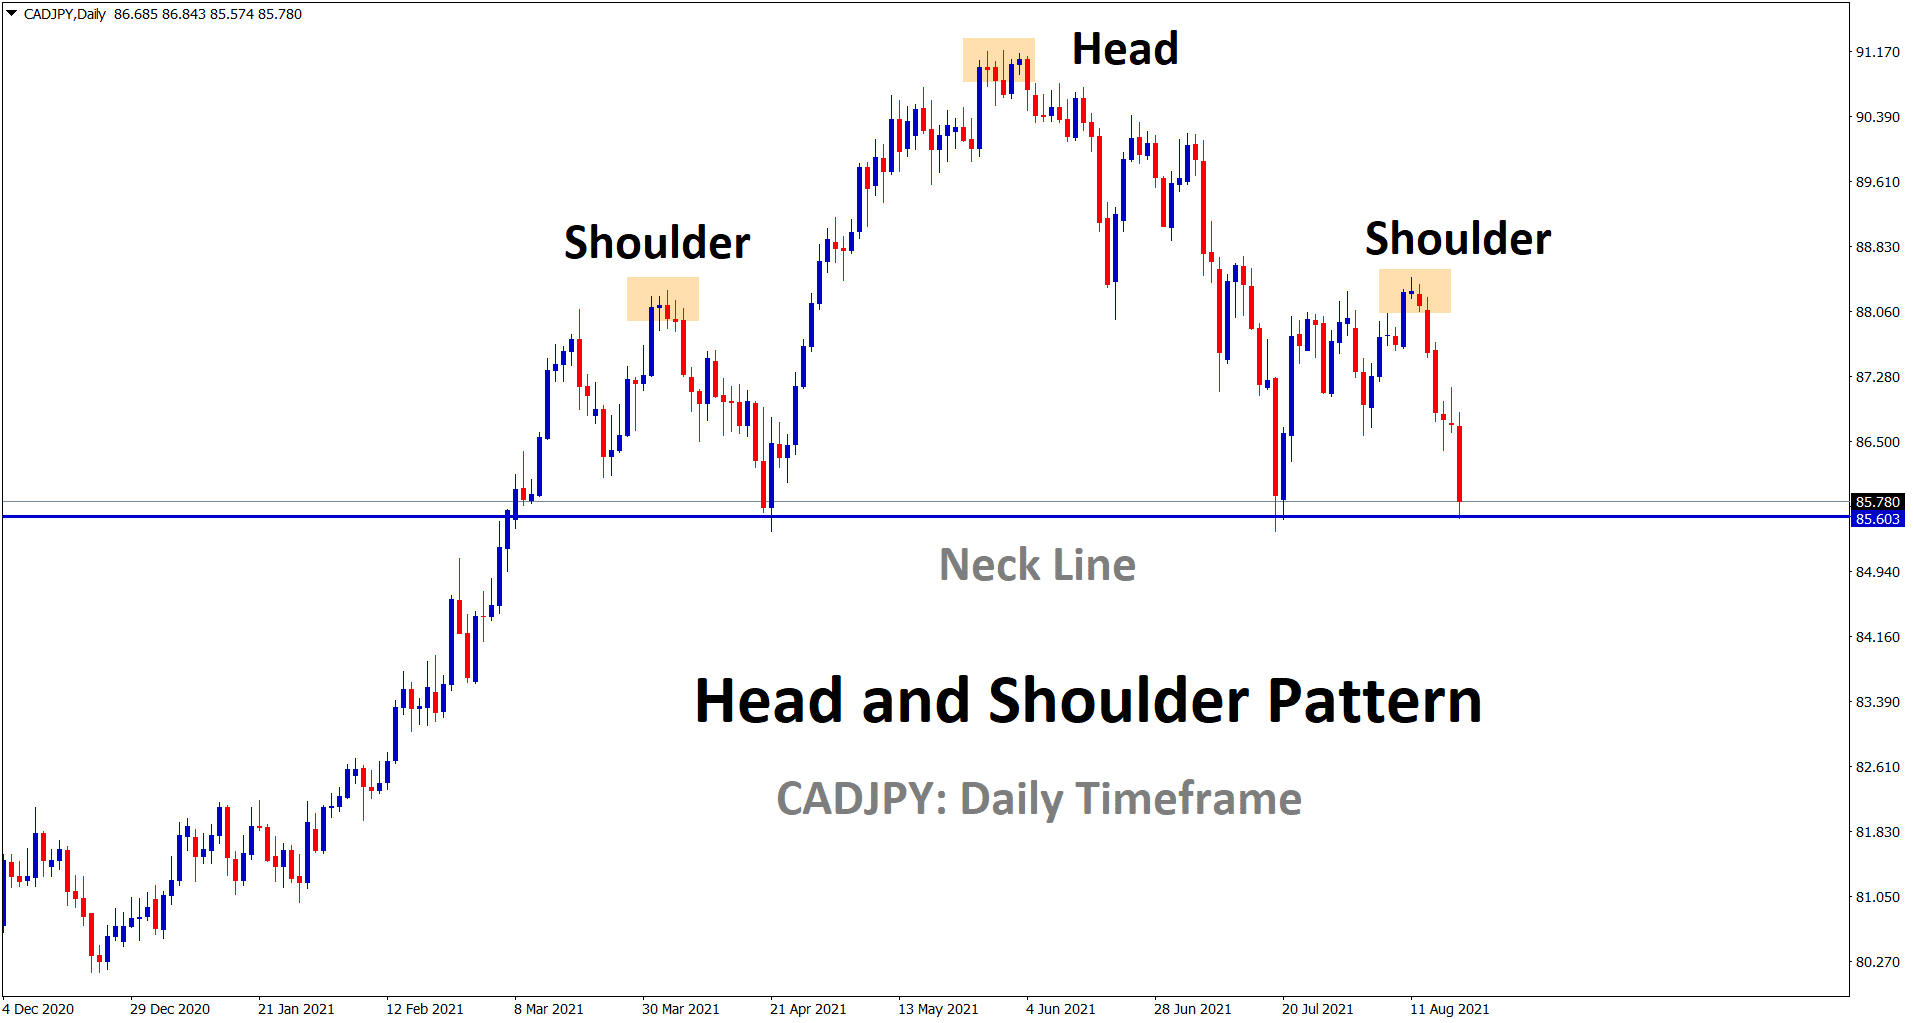 CADJPY has formed the head and shoulder pattern in the daily timeframe